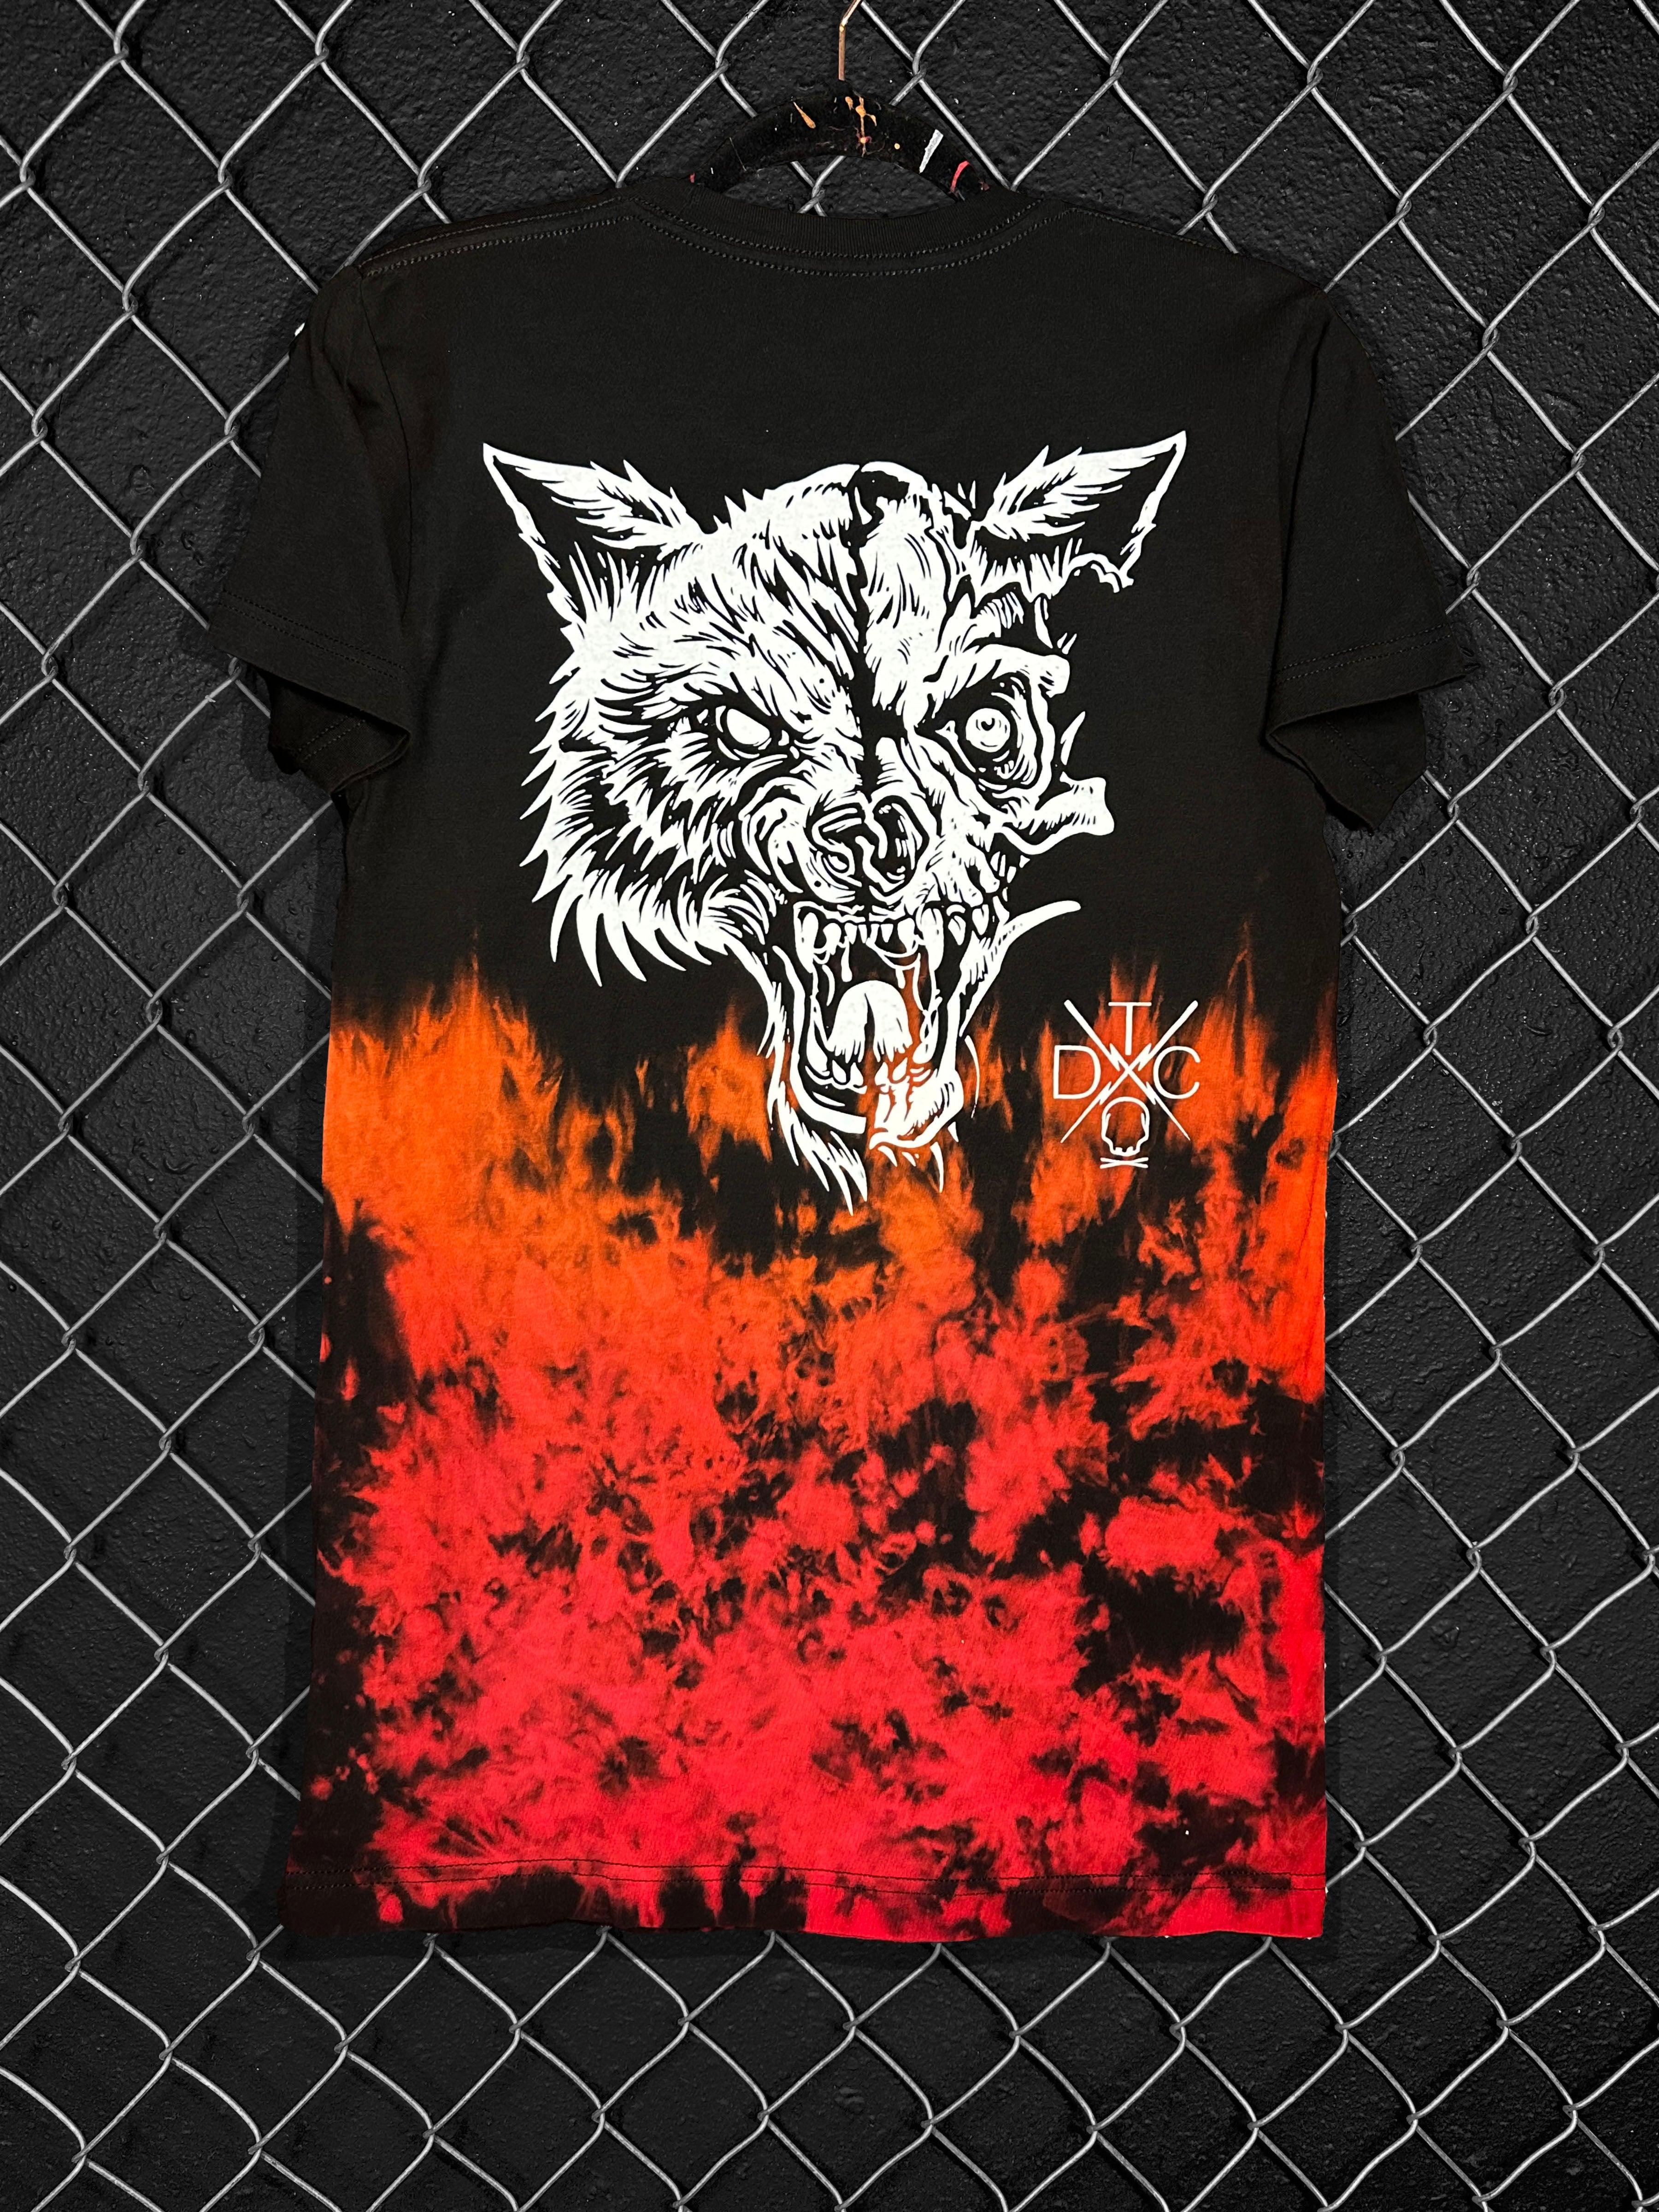 LONE WOLF TEE TIE CLASSIC DYE - The Drive Clothing